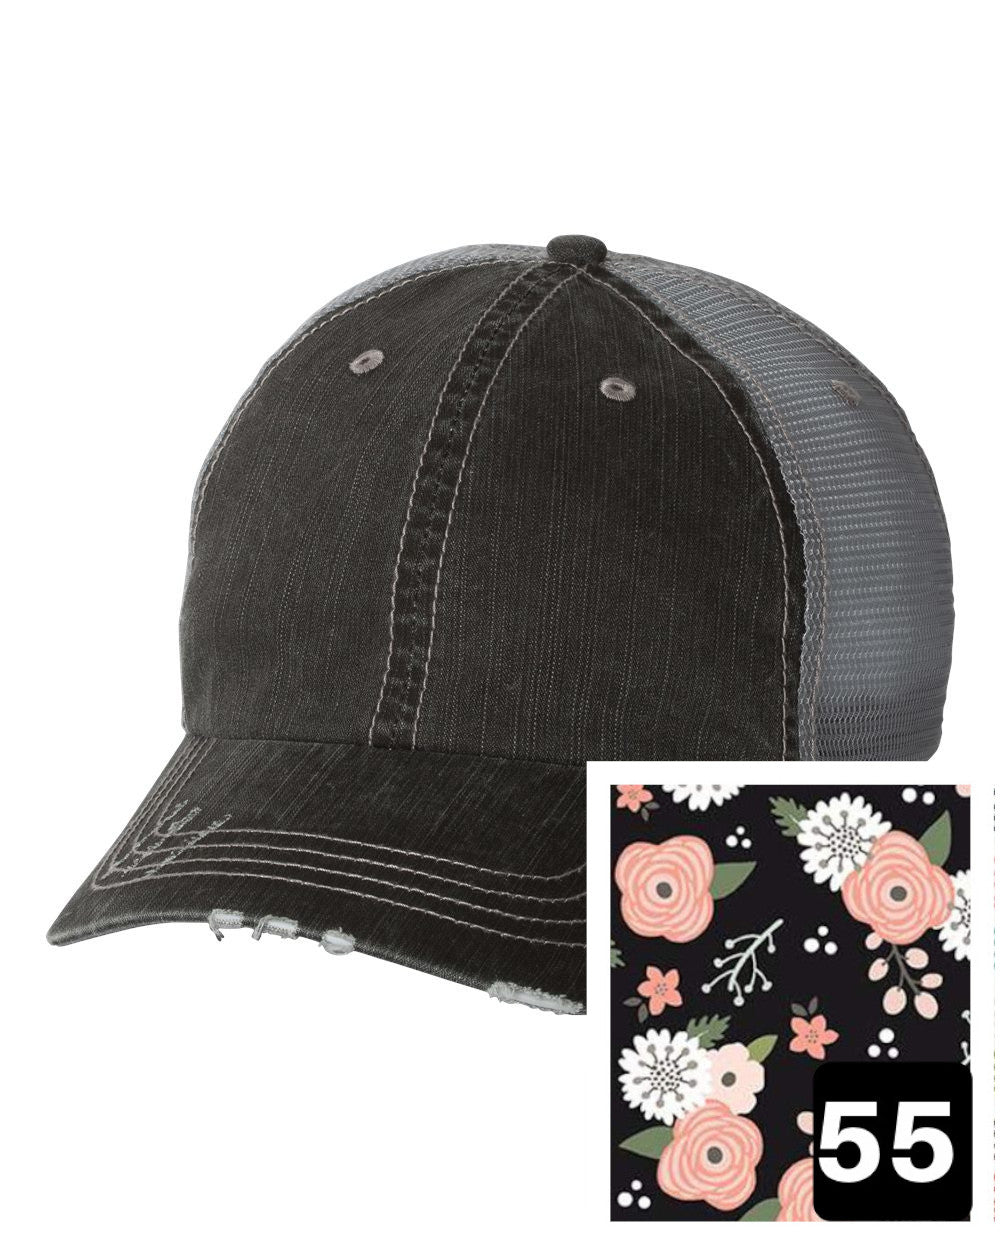 gray distressed trucker hat with petite floral on navy fabric state of North Dakota